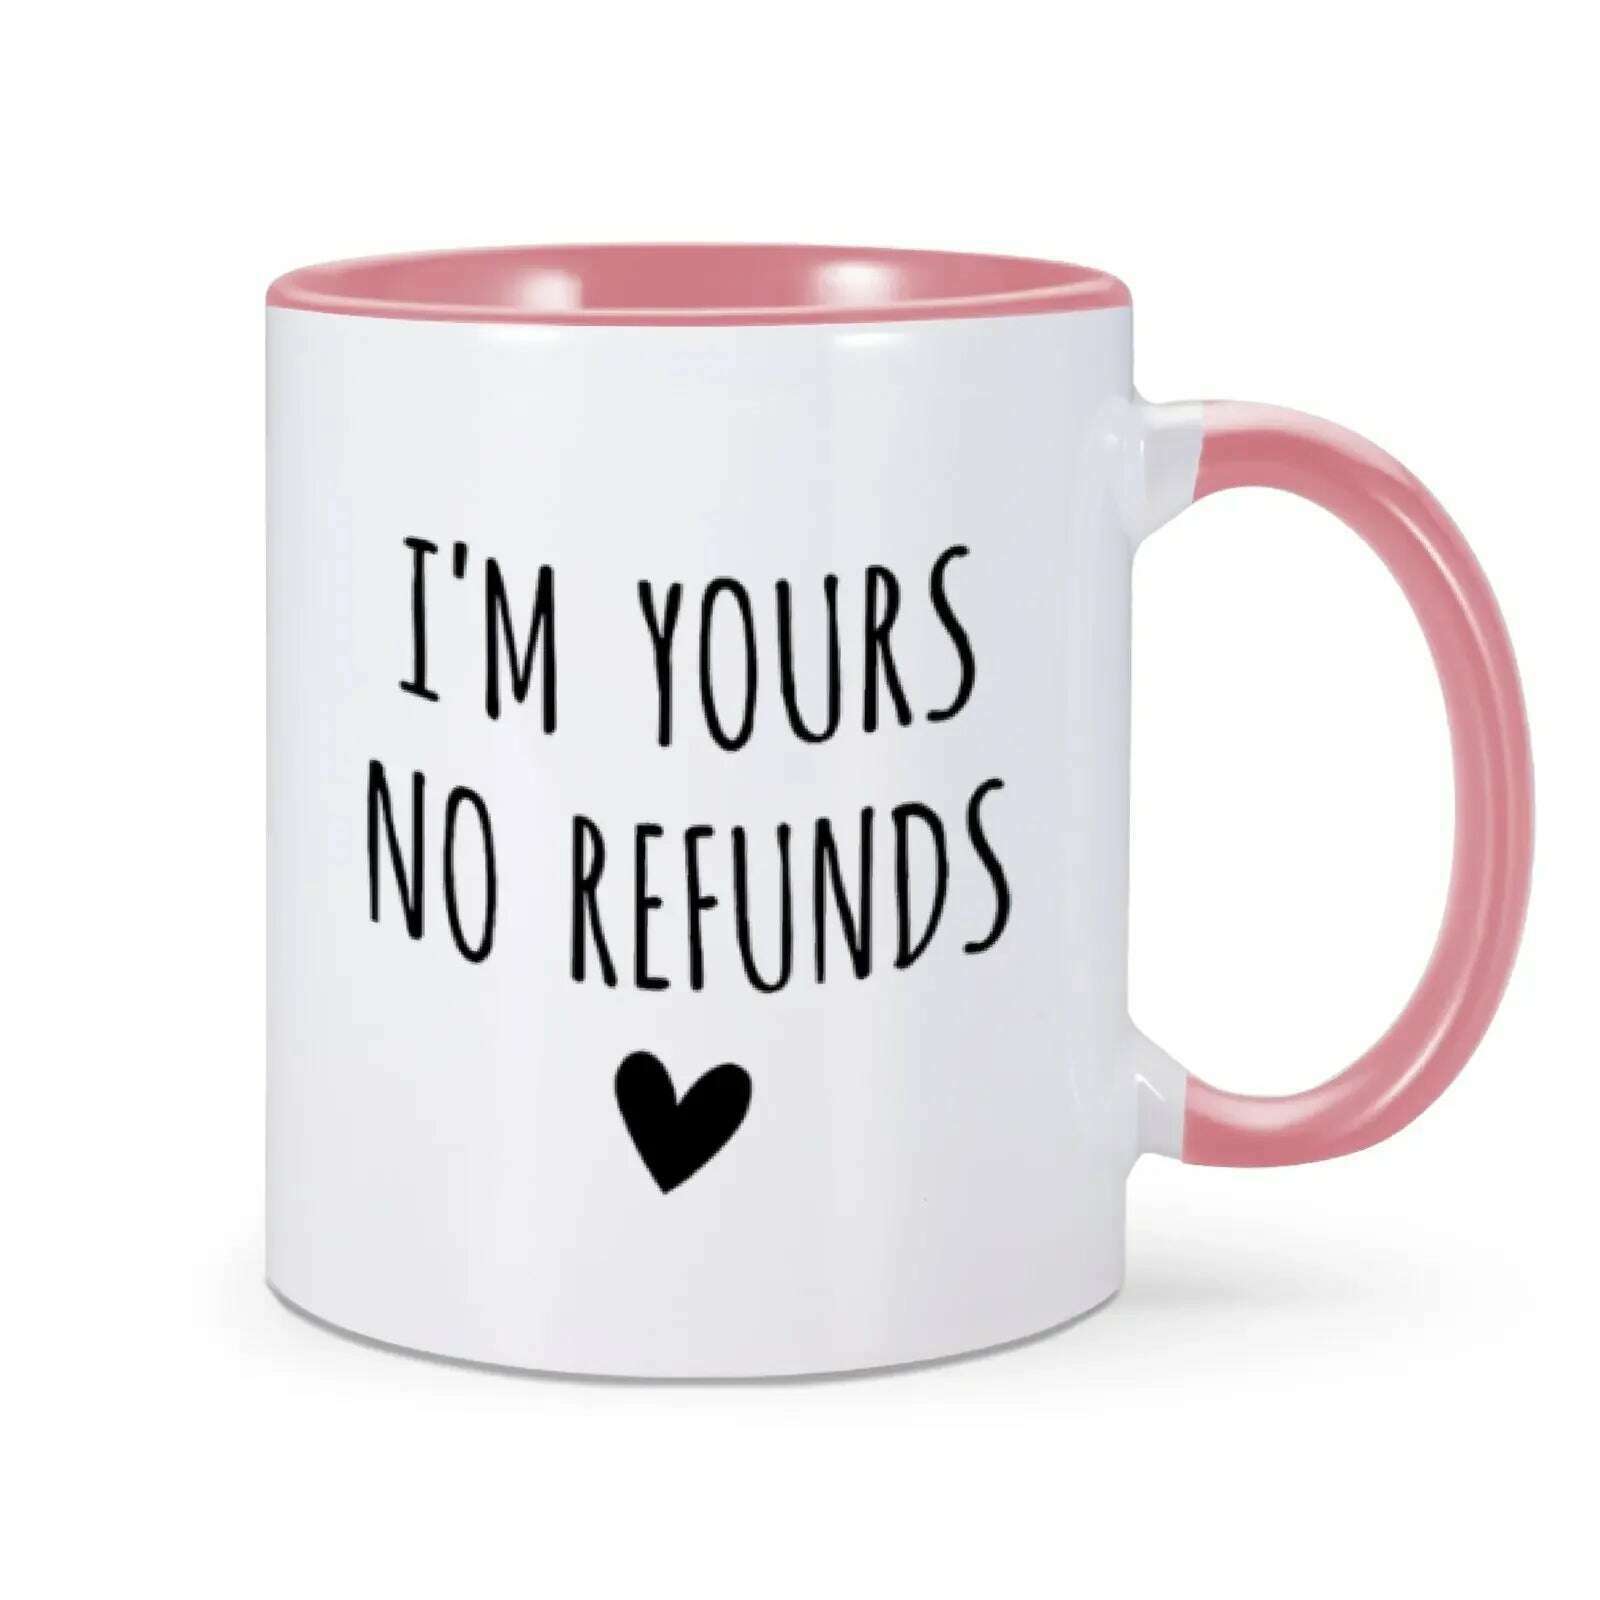 KIMLUD, I'm Yours No Refunds Mug Valentine's Day Mug Valentines Gift for Him Her Husband Wife Funny Coffee Cup for Women Men 11 Oz Mug, Pink / 11oz, KIMLUD Women's Clothes